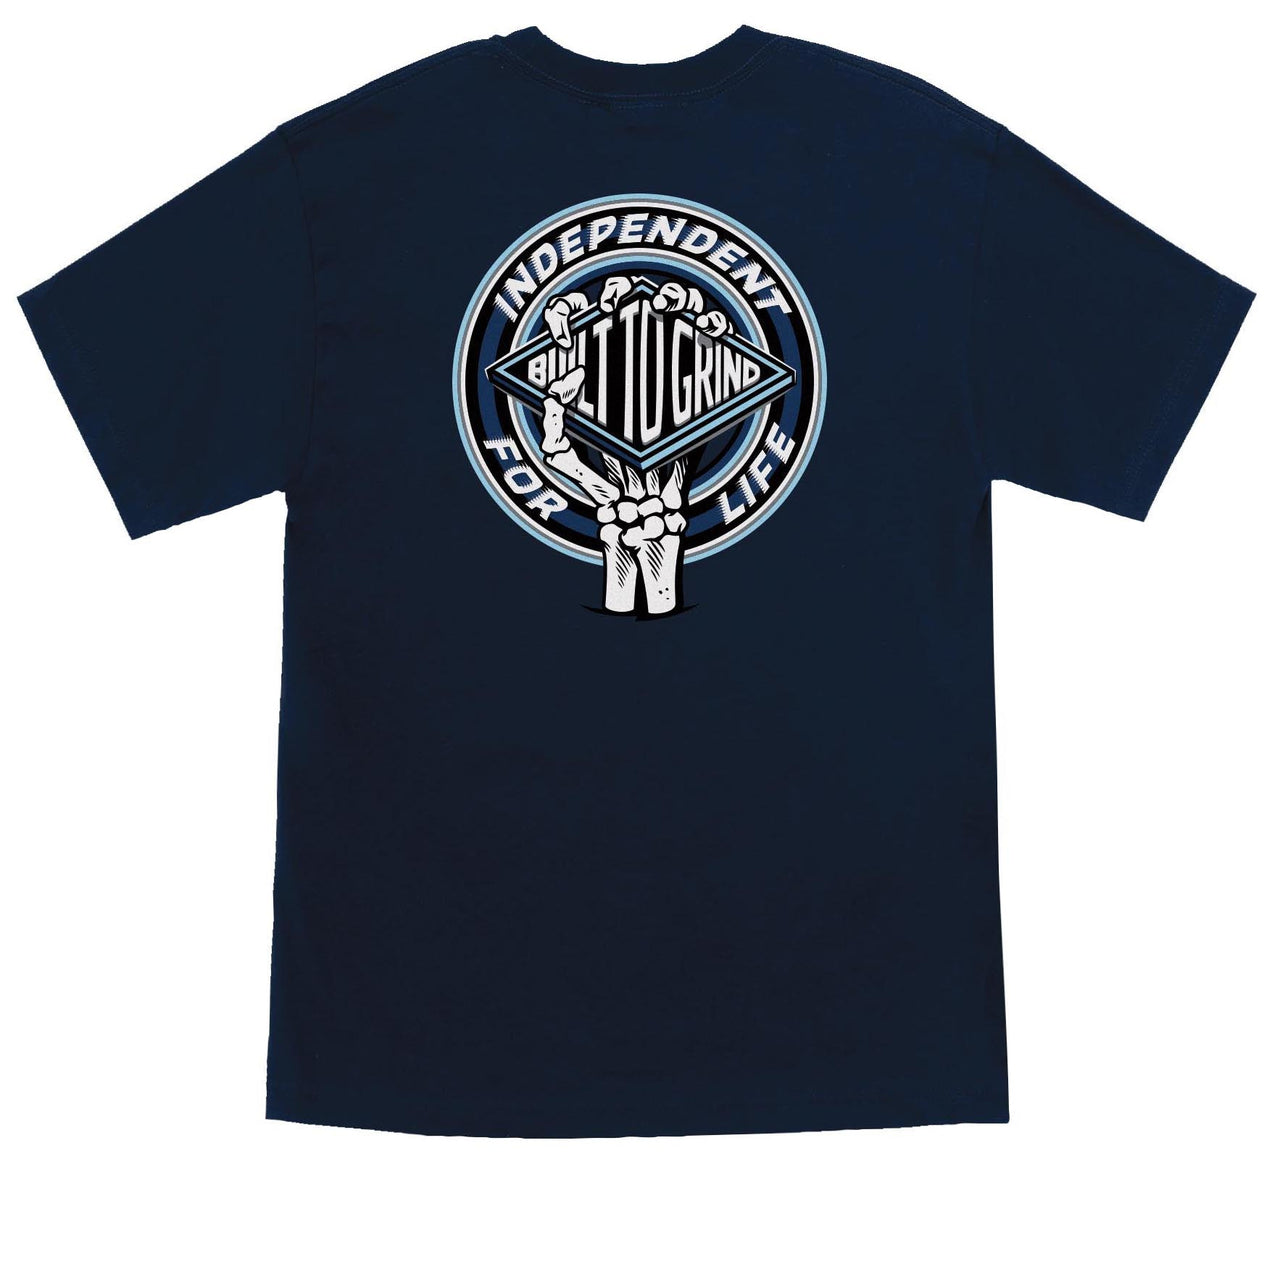 Independent For Life Clutch T-Shirt - Navy image 1